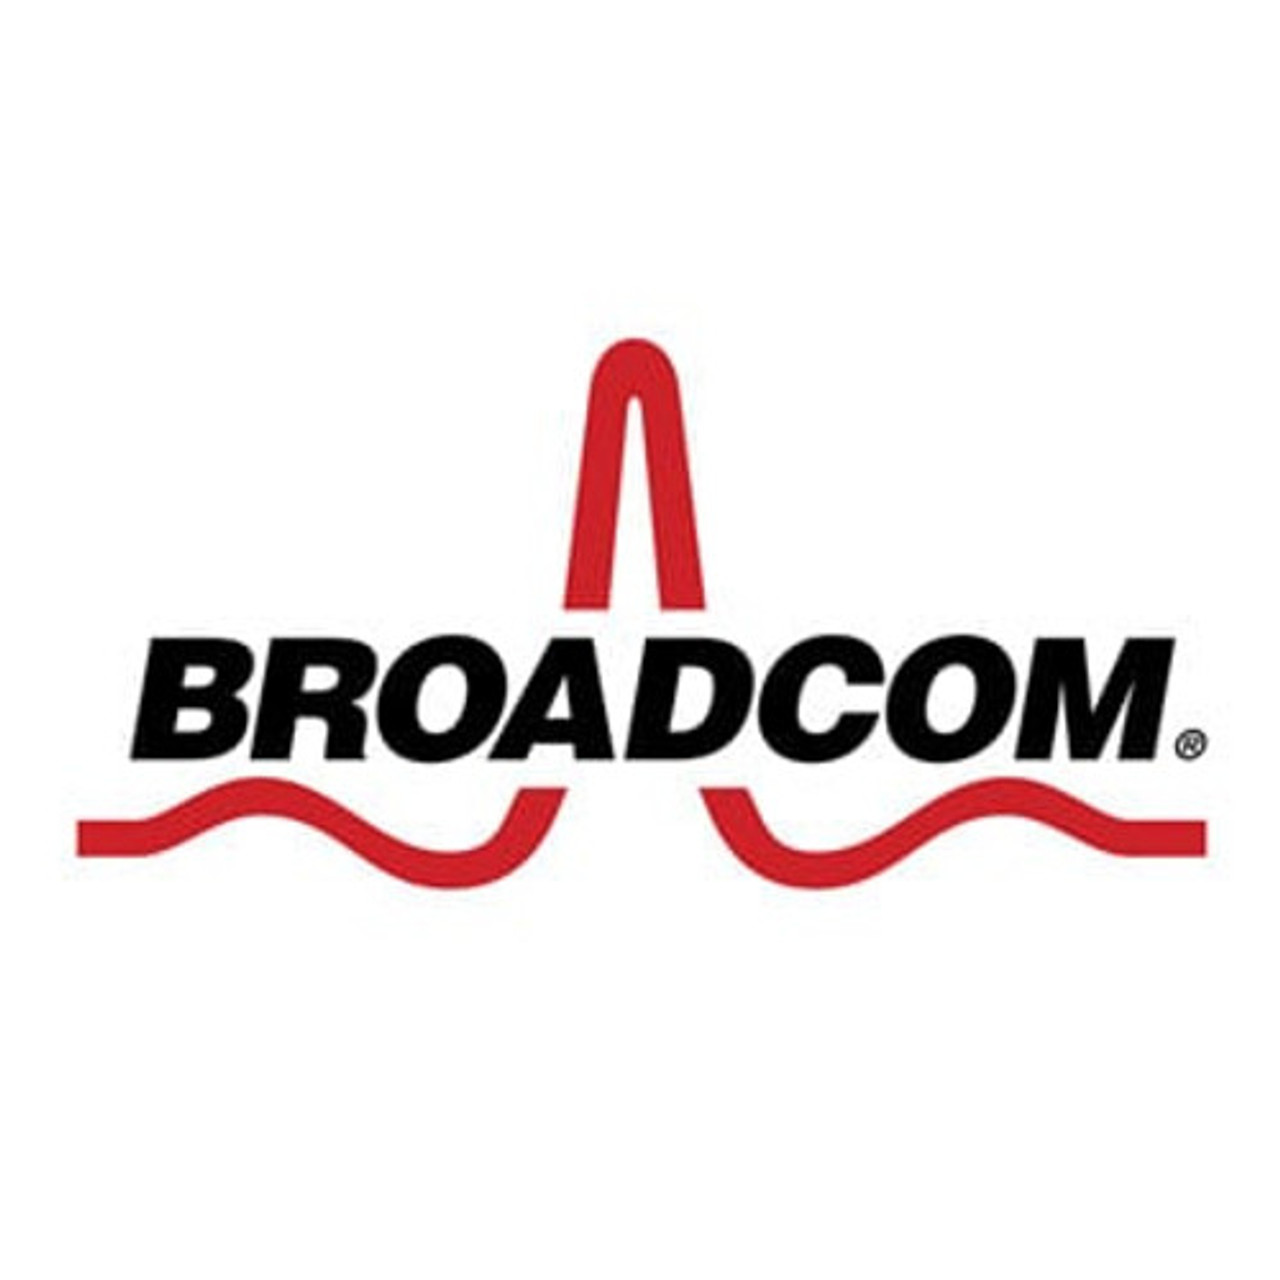 Broadcom 2.0 Commercial VIP Feitian Authenticator, C200 H41, OTP Time Based Token, ACD-GOV 100-999, 3 Years Warranty